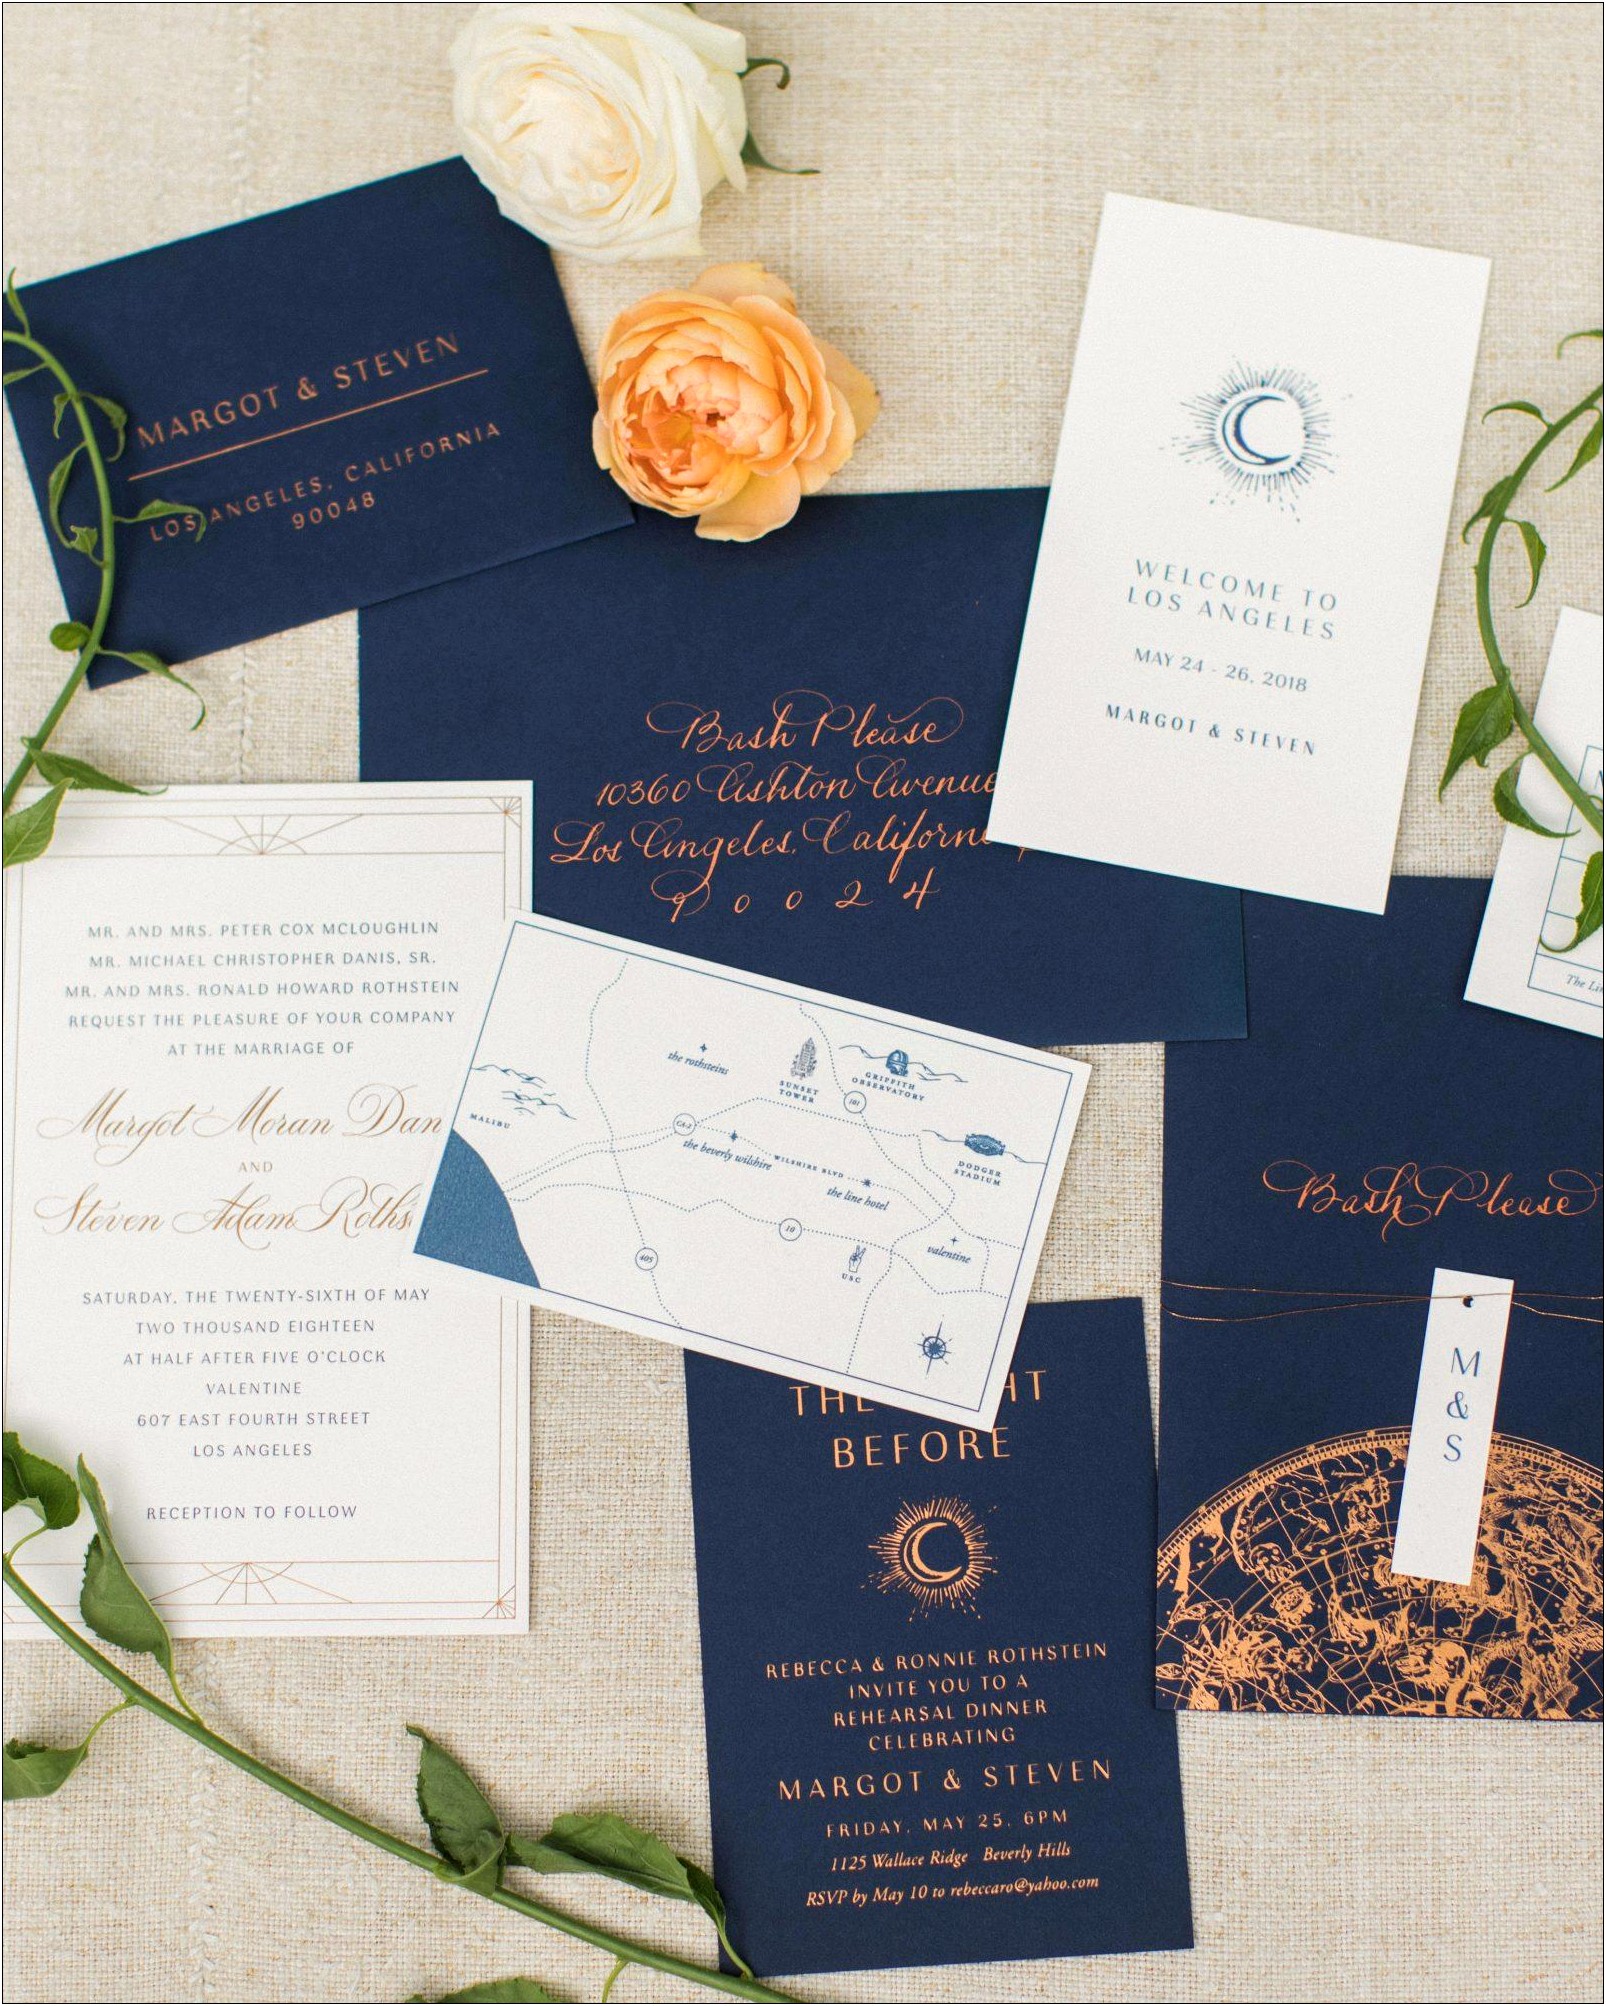 Can You Write And Family On Wedding Invitations